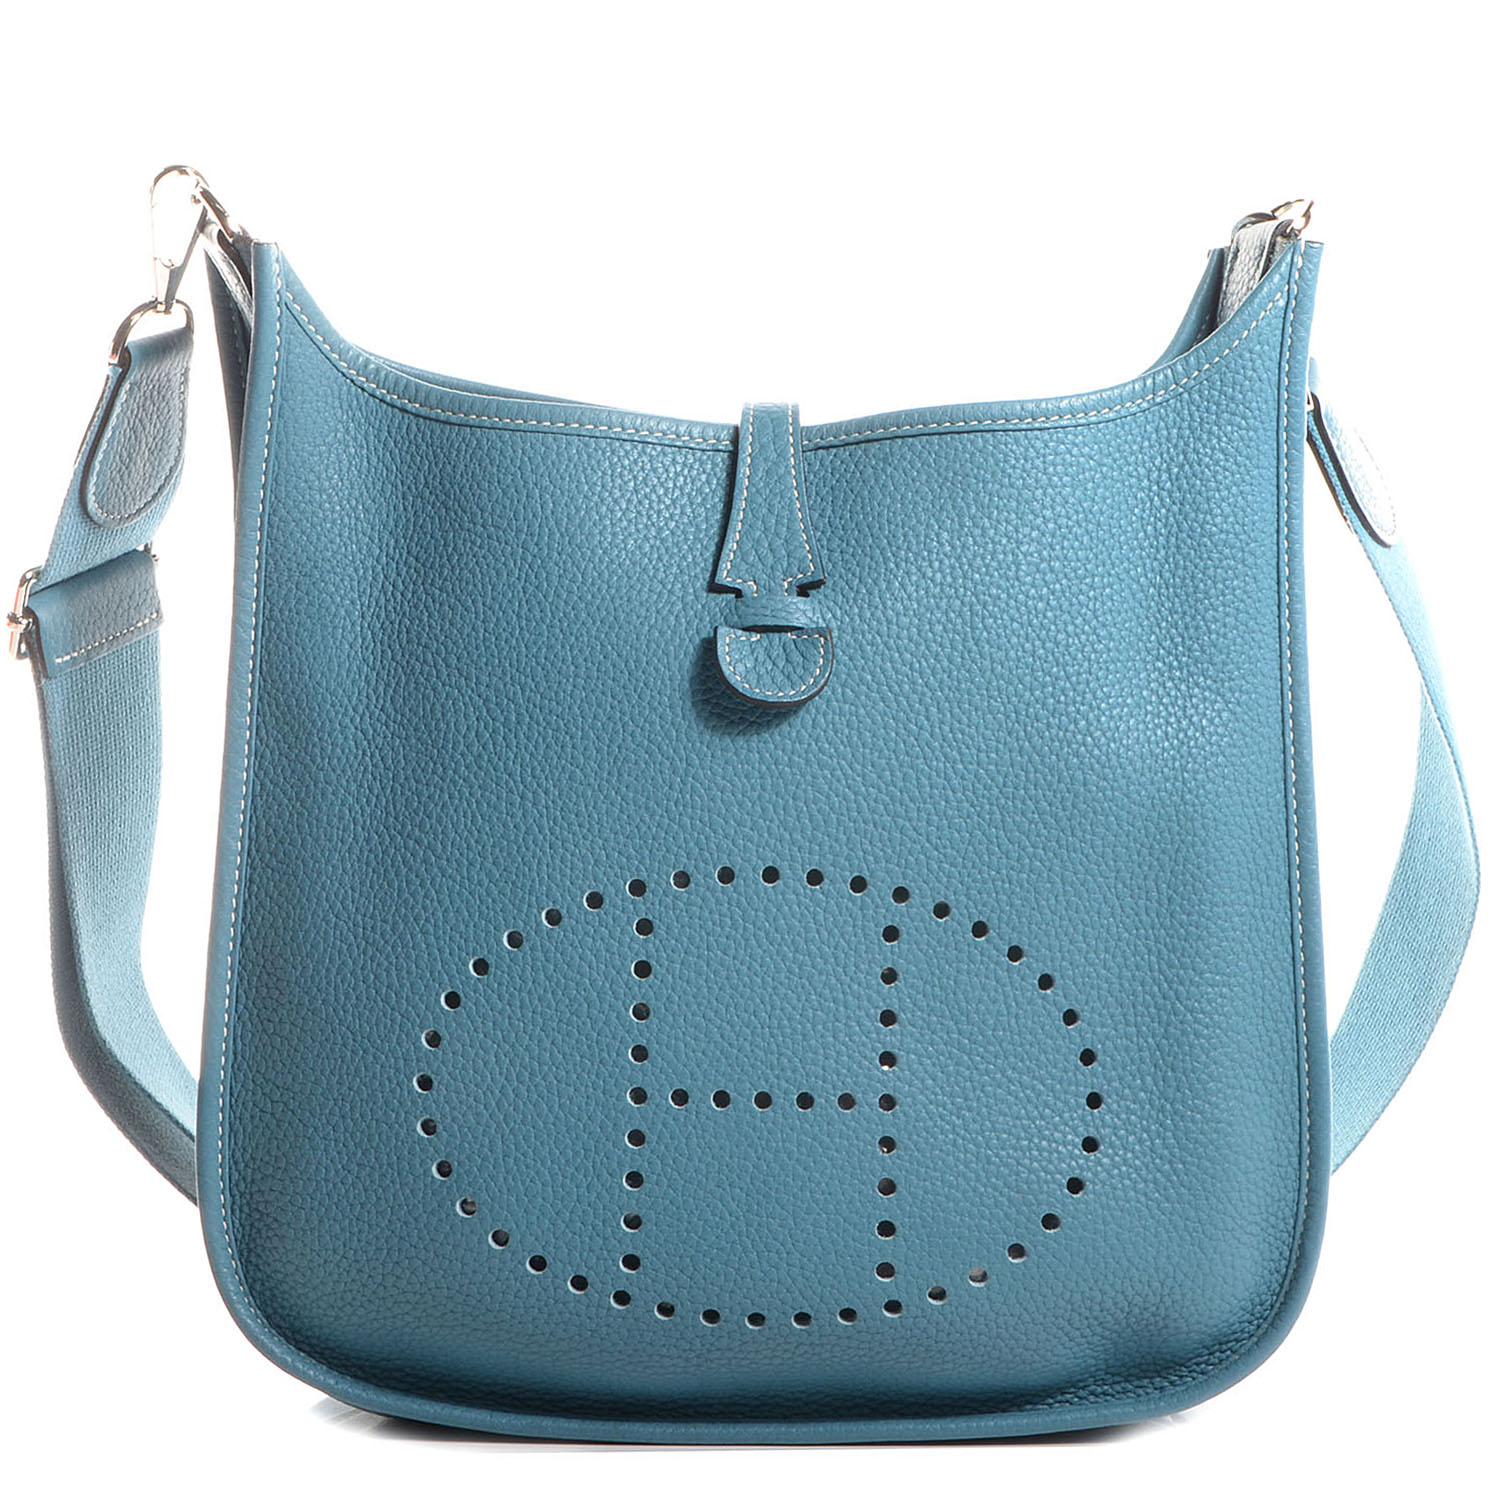 HERMES Taurillon Clemence Evelyne III PM Blue Jean 68386 | FASHIONPHILE